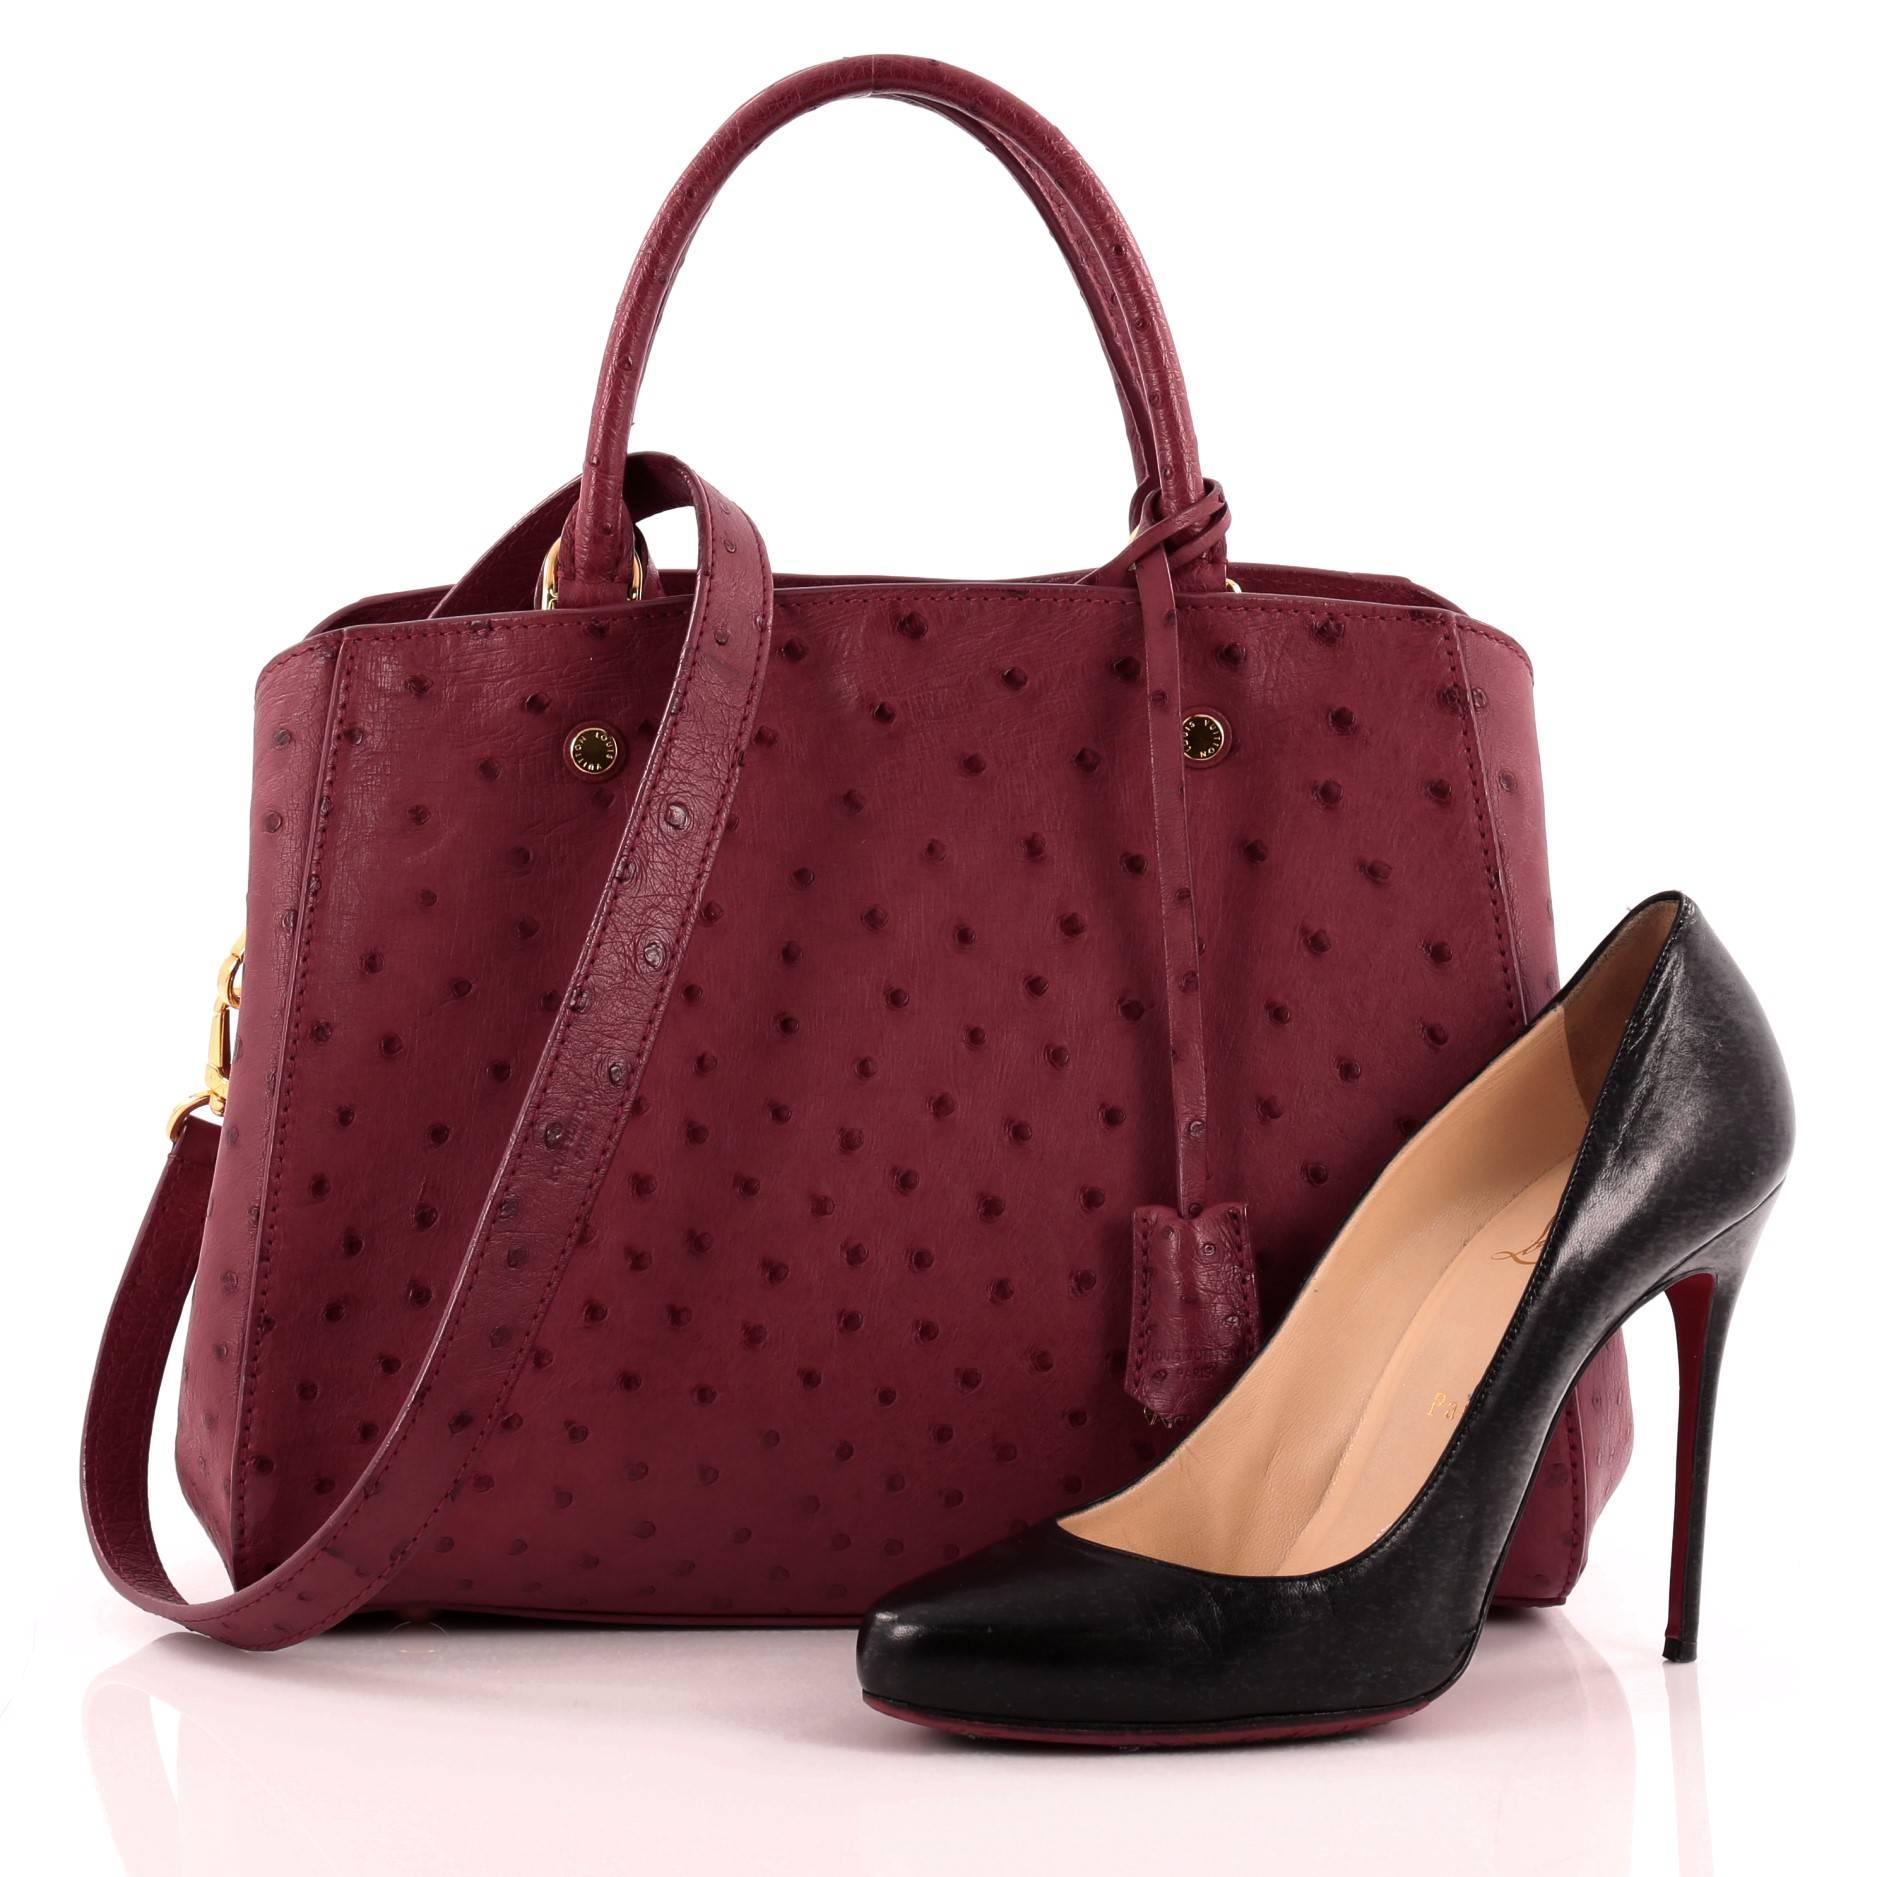 This authentic Louis Vuitton Montaigne Ostrich MM named after the glitzy Parisian is a hard-to-find collector's piece made for LV lovers. Crafted from fuschia genuine ostrich skin, this chic, luxurious tote features dual-rolled handles, removable